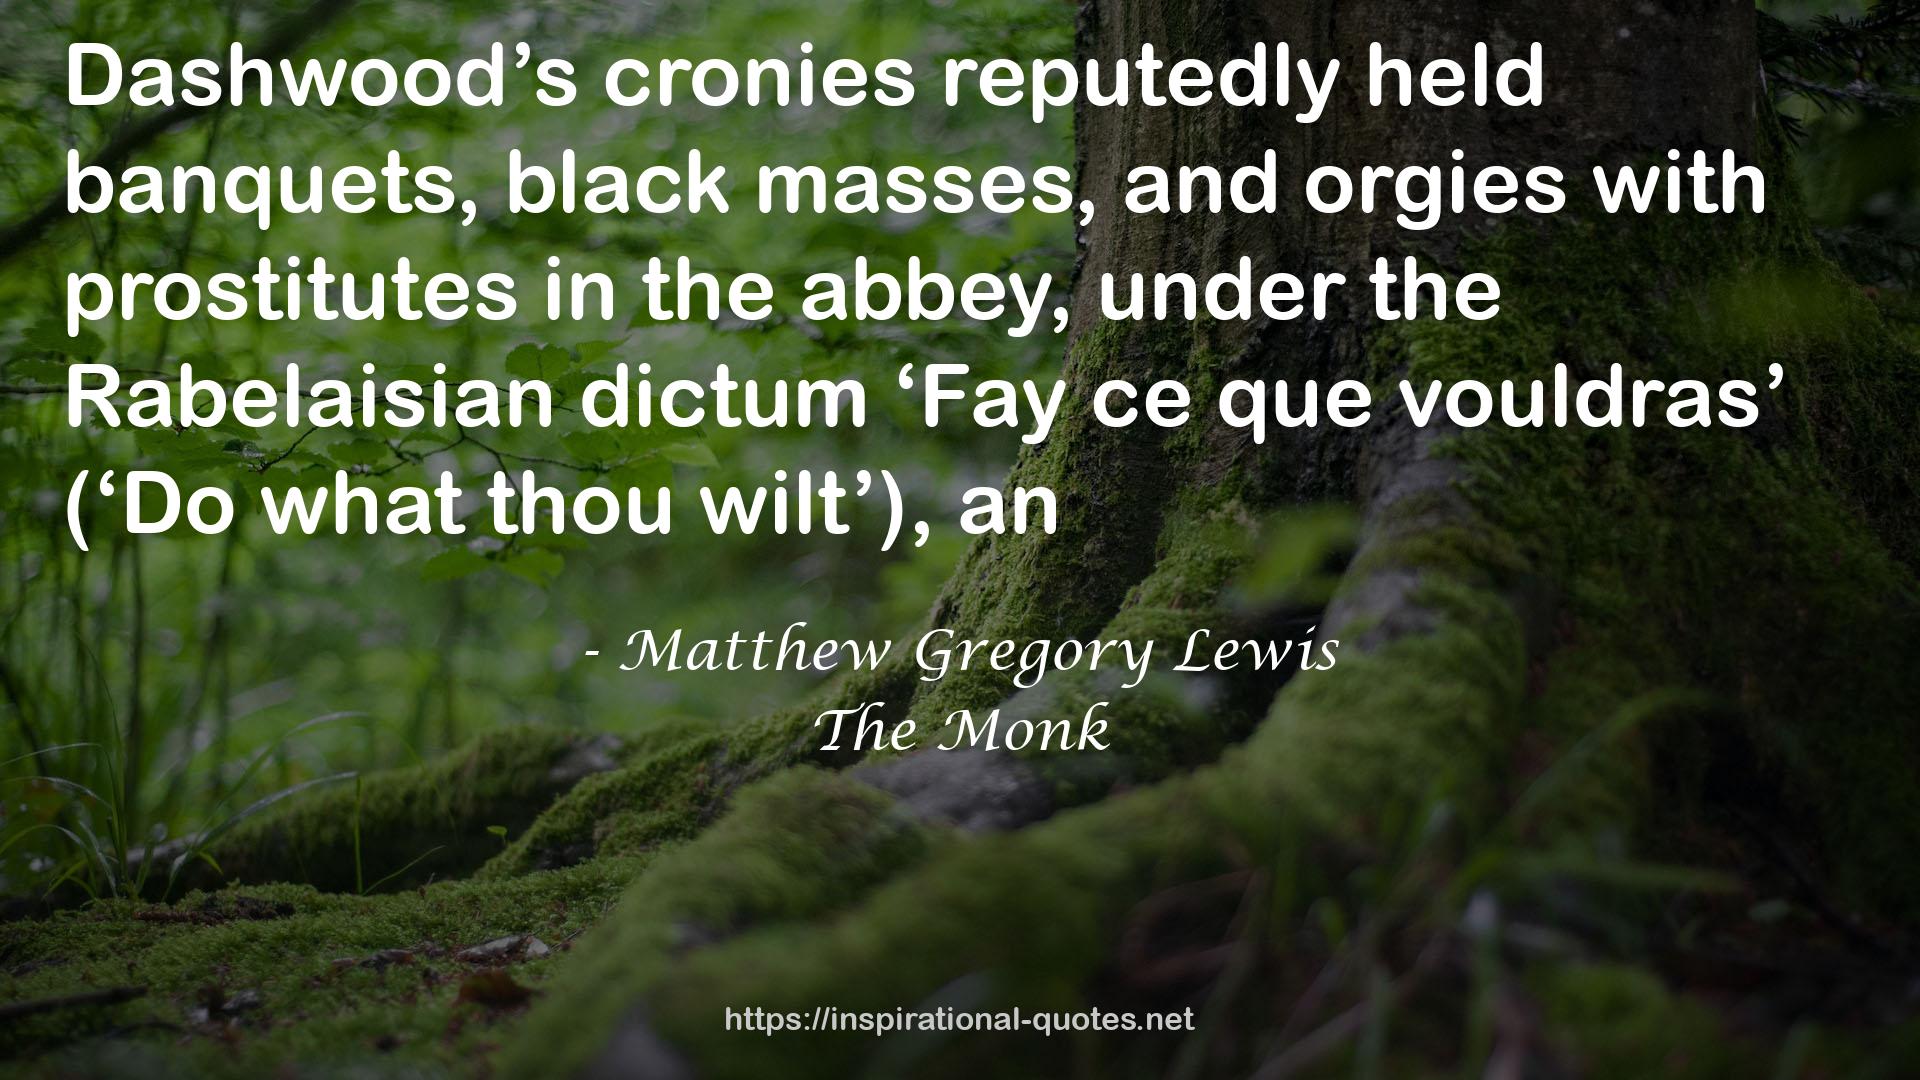 Matthew Gregory Lewis QUOTES